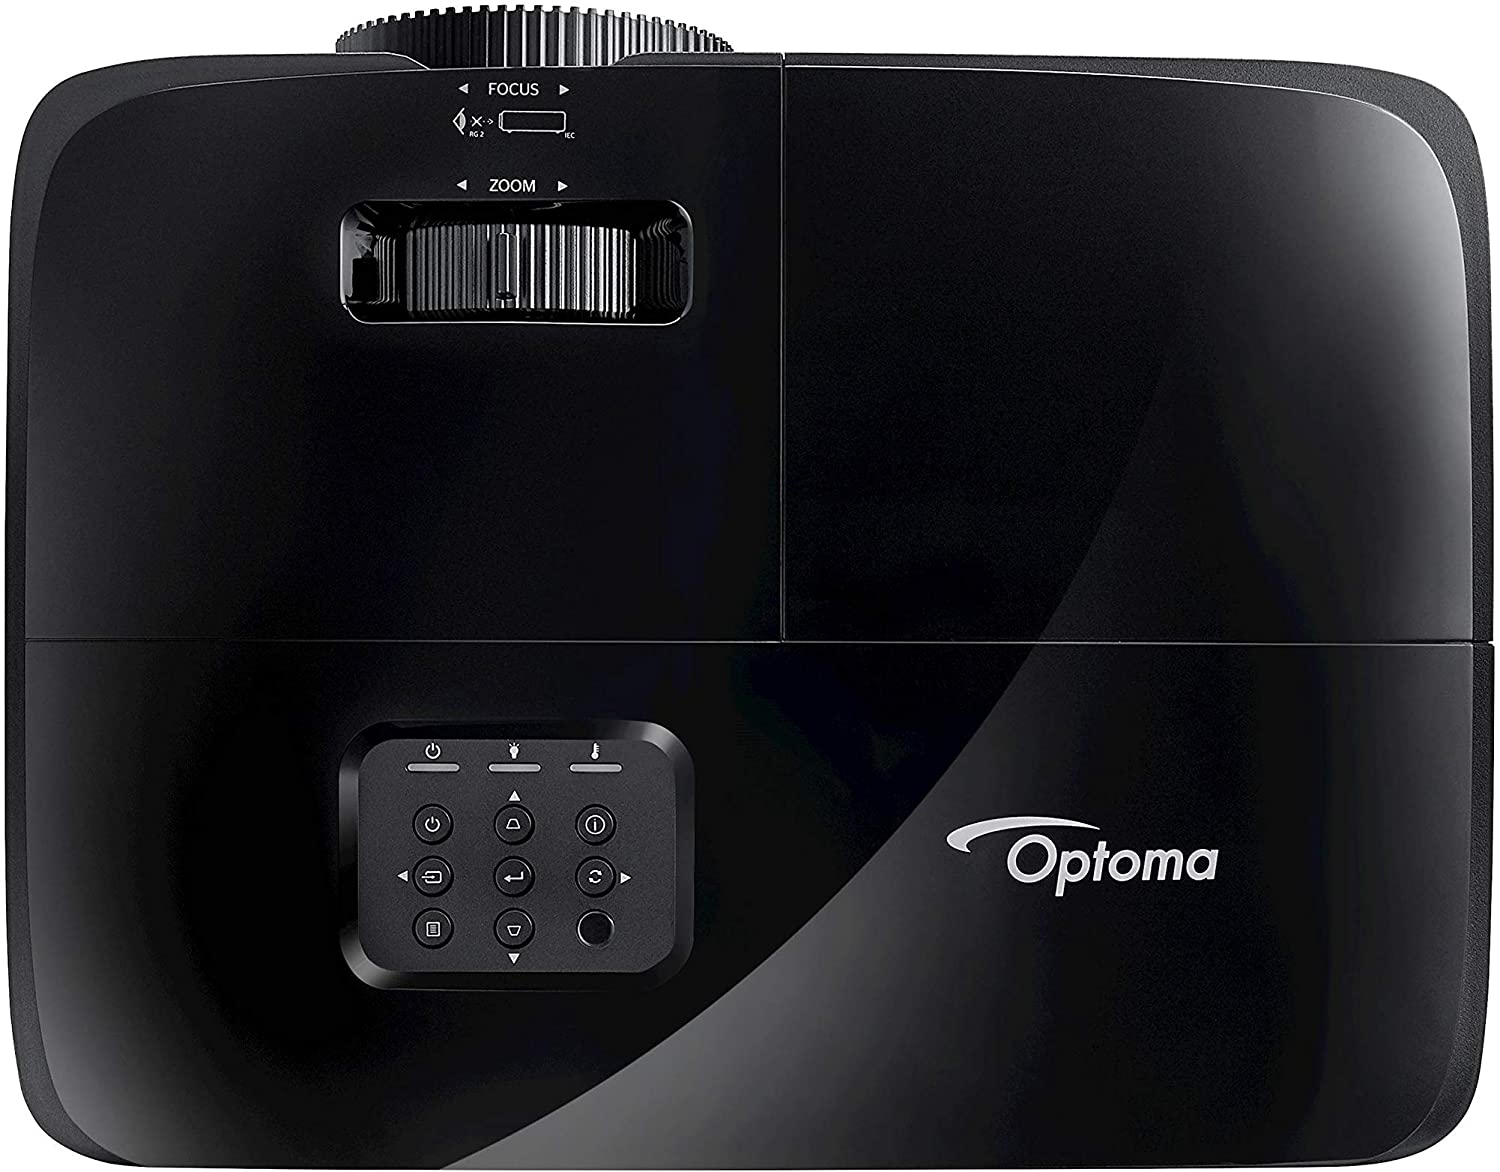 videoprojecteur optoma h184x fonctions